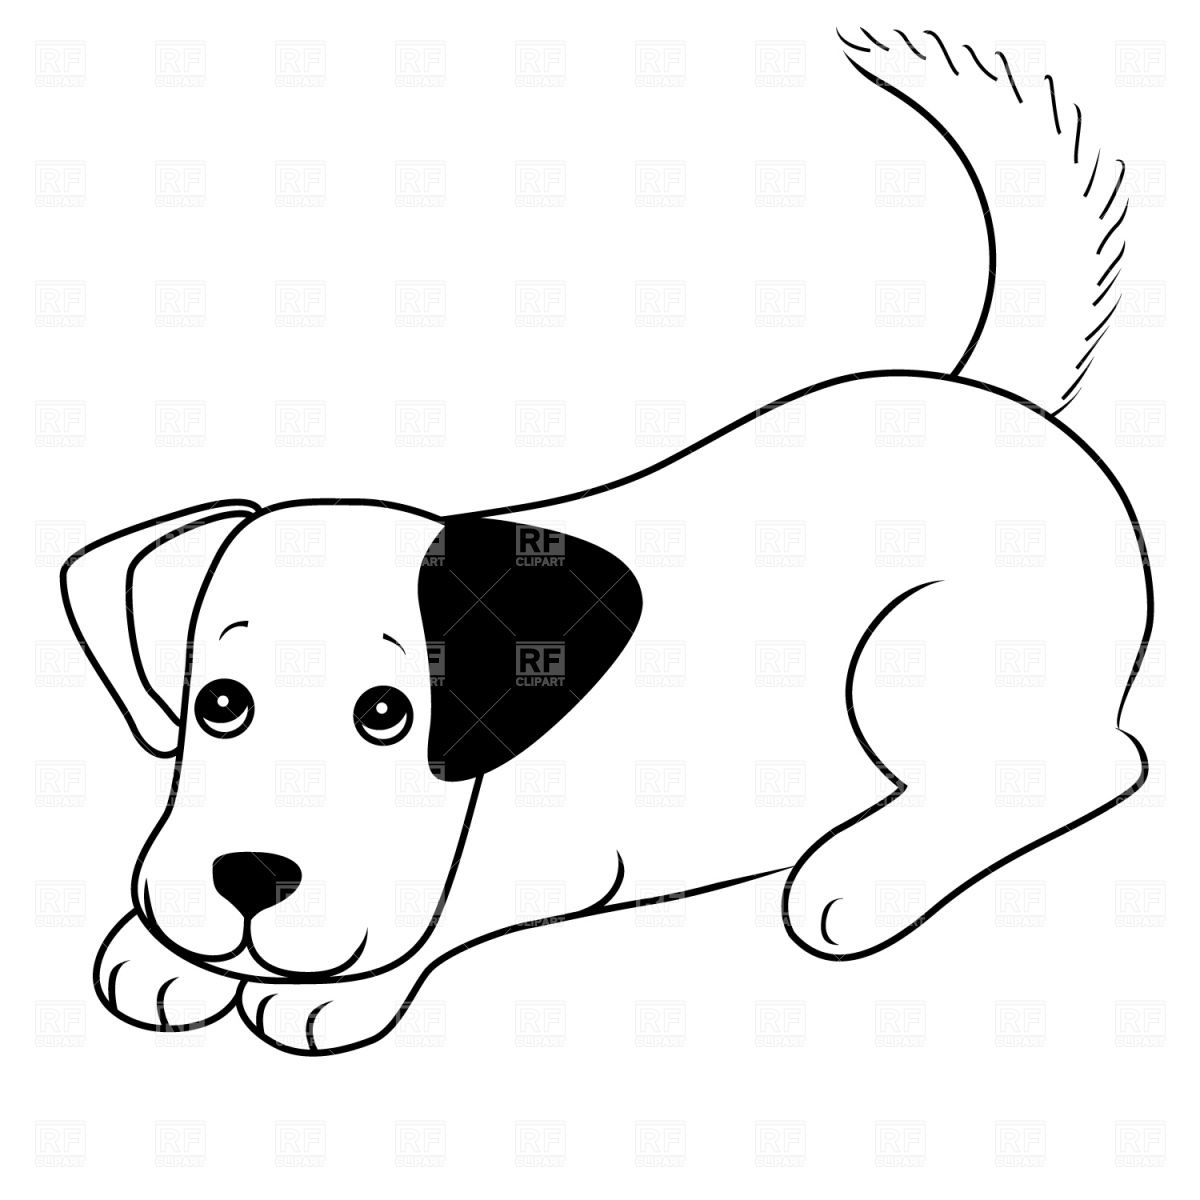 Puppy Dog Face Clip Art   Clipart Panda   Free Clipart Images